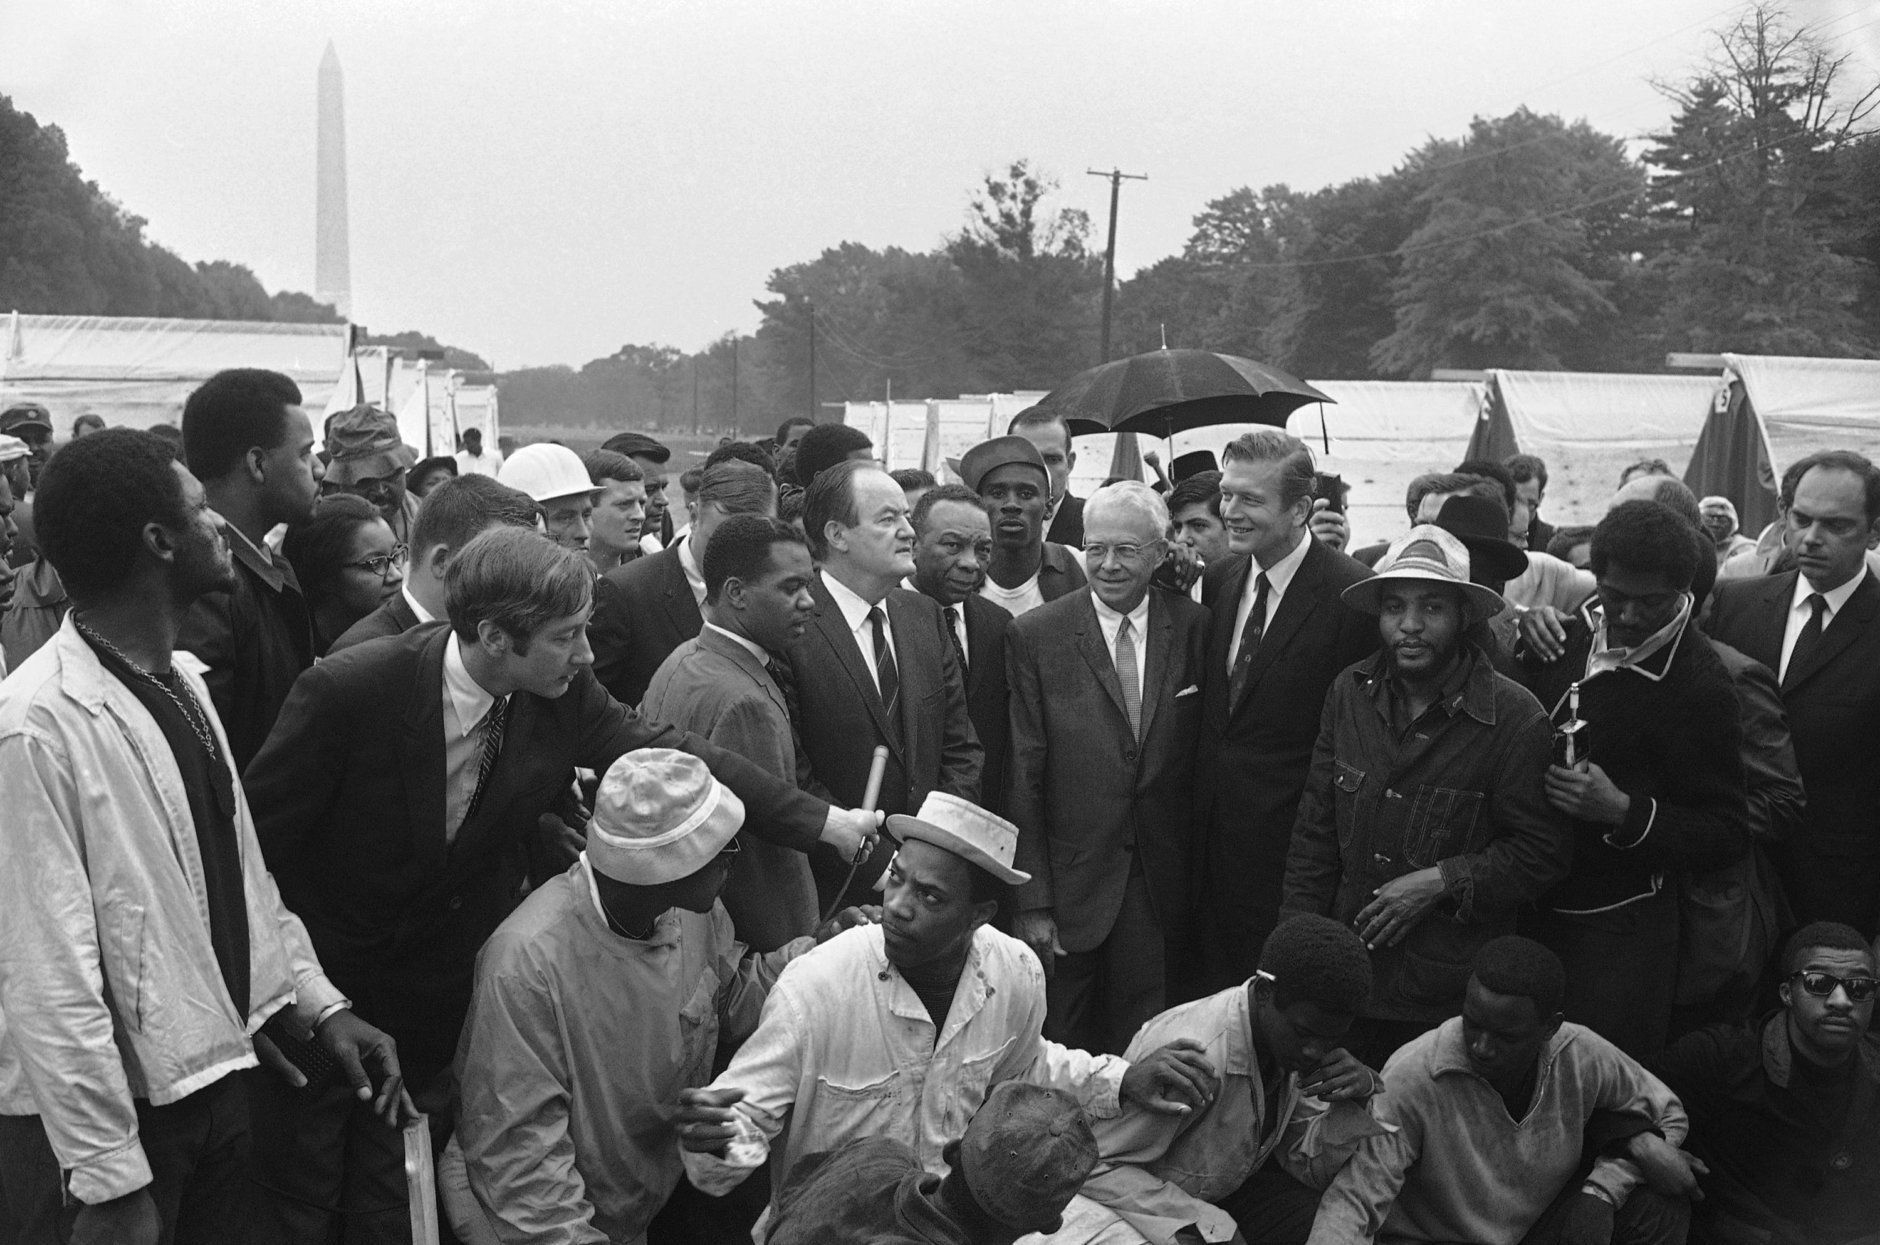 Notables get a conducted tour of Resurrection City, the encampment erected by the Poor Peoples Campaign near the Washington Monument, left background, May 16, 1968. Identifiable at center of group, left to right are Rev. Walter Fauntroy, Wash. D.C. representative of Southern Christian Leadership Conference (left of handheld microphone); Vice President Hubert Humphrey; Mayor Walter Washington of Wash. D.C.; Mayor Ivan Allen Jr. of Atlanta; Mayor John Lindsay of New York City, and Rev. James Bevel of Southern Christian Leadership Conference. (AP Photo/John Rous)